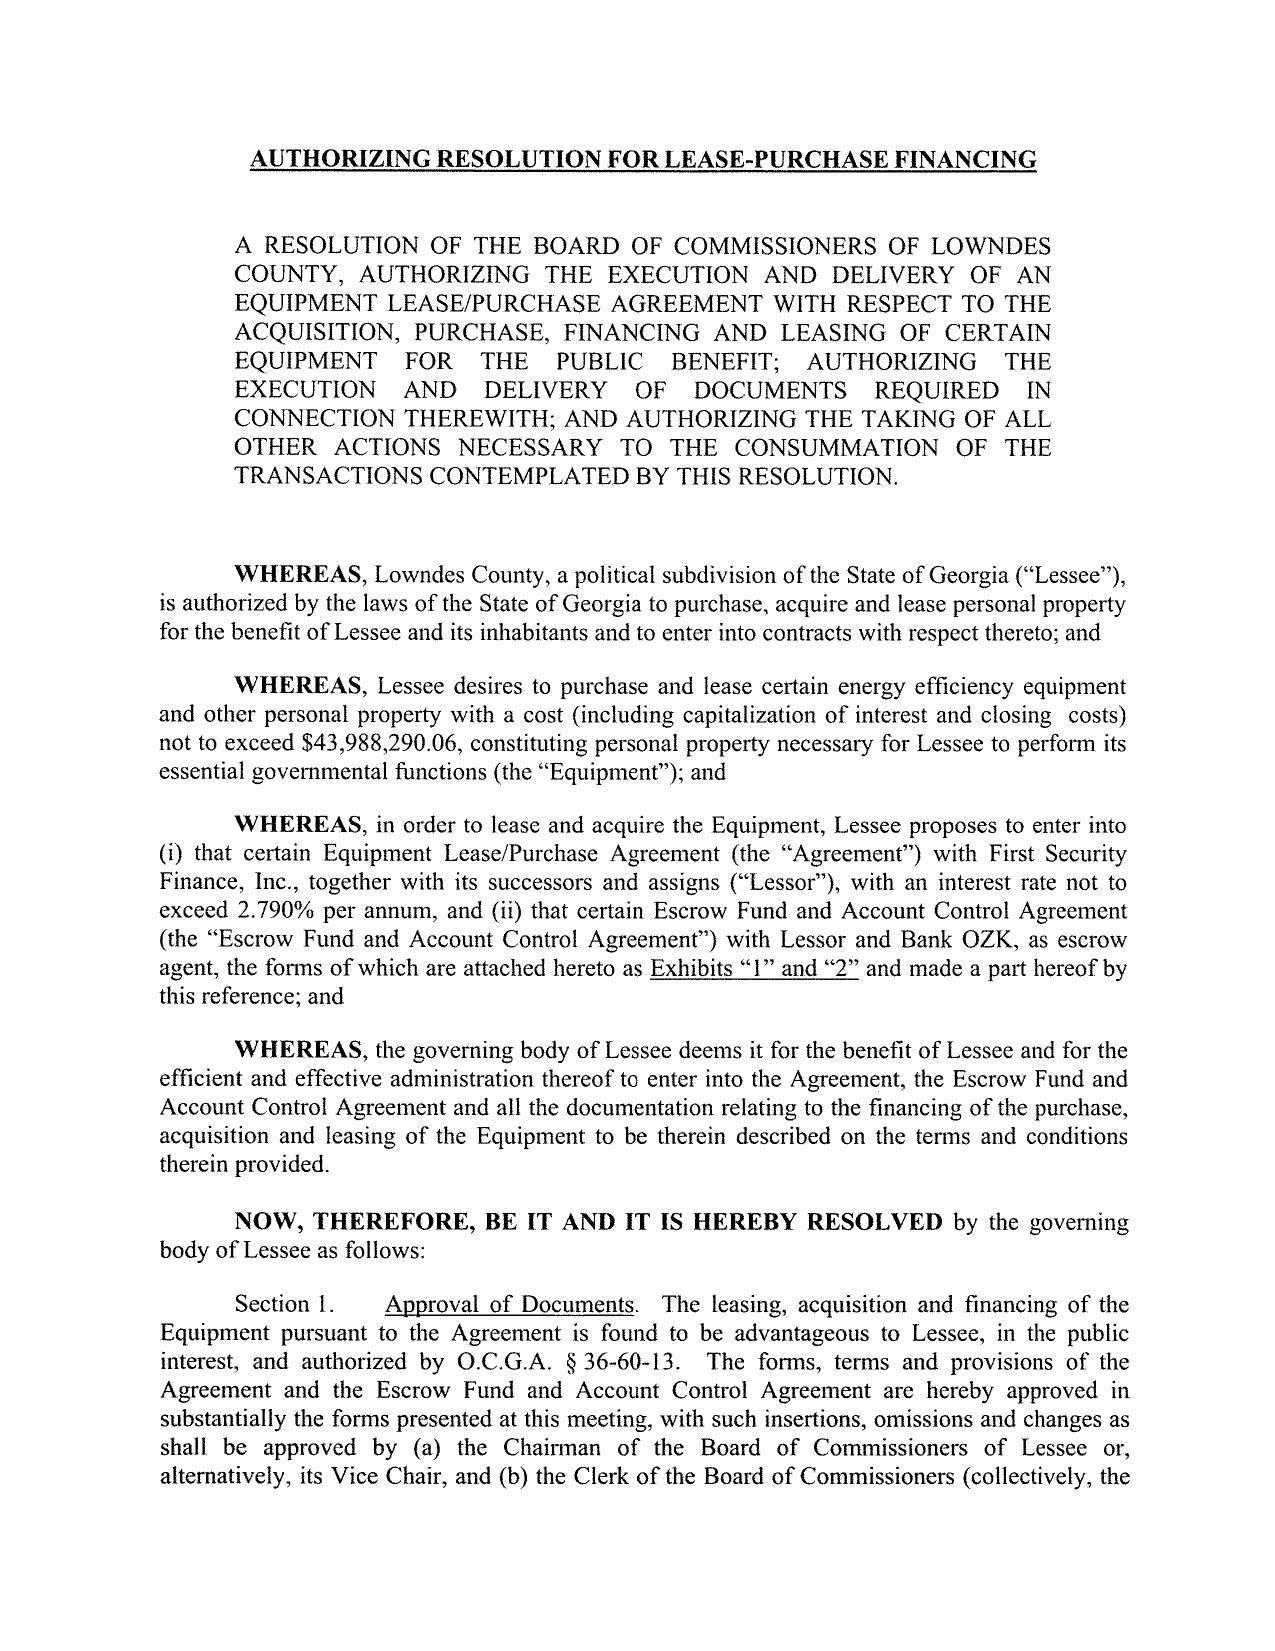 A RESOLUTION OF THE BOARD OF COMMISSIONERS OF LOWNDES